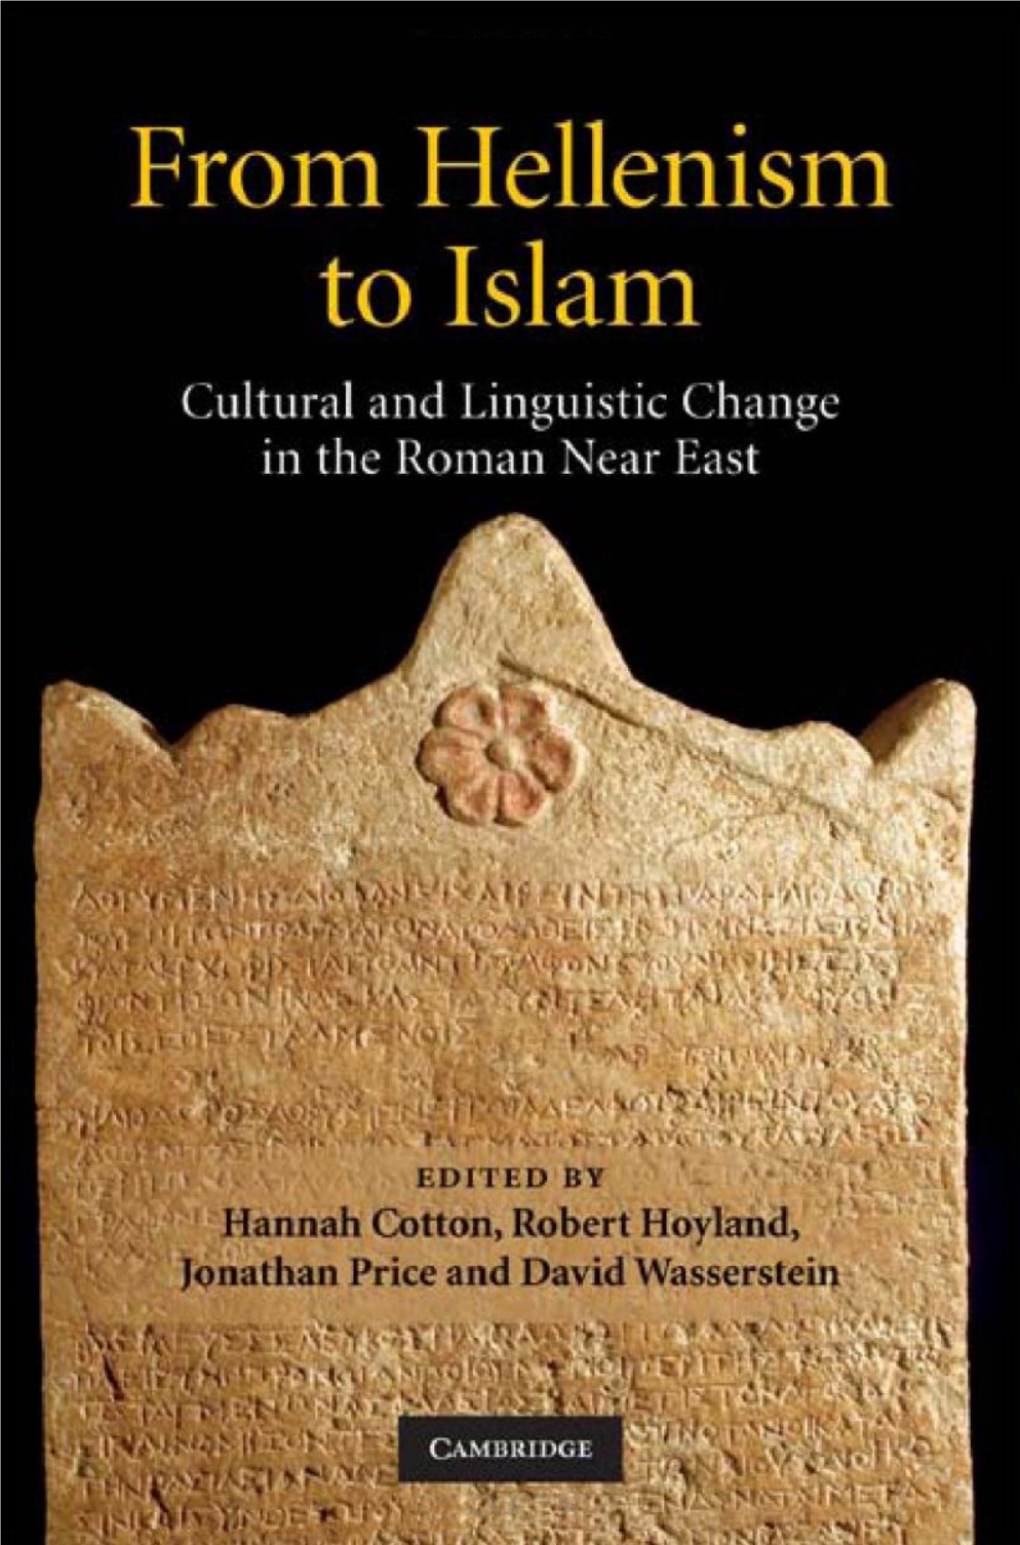 Cultural and Linguistic Change in the Roman Near East